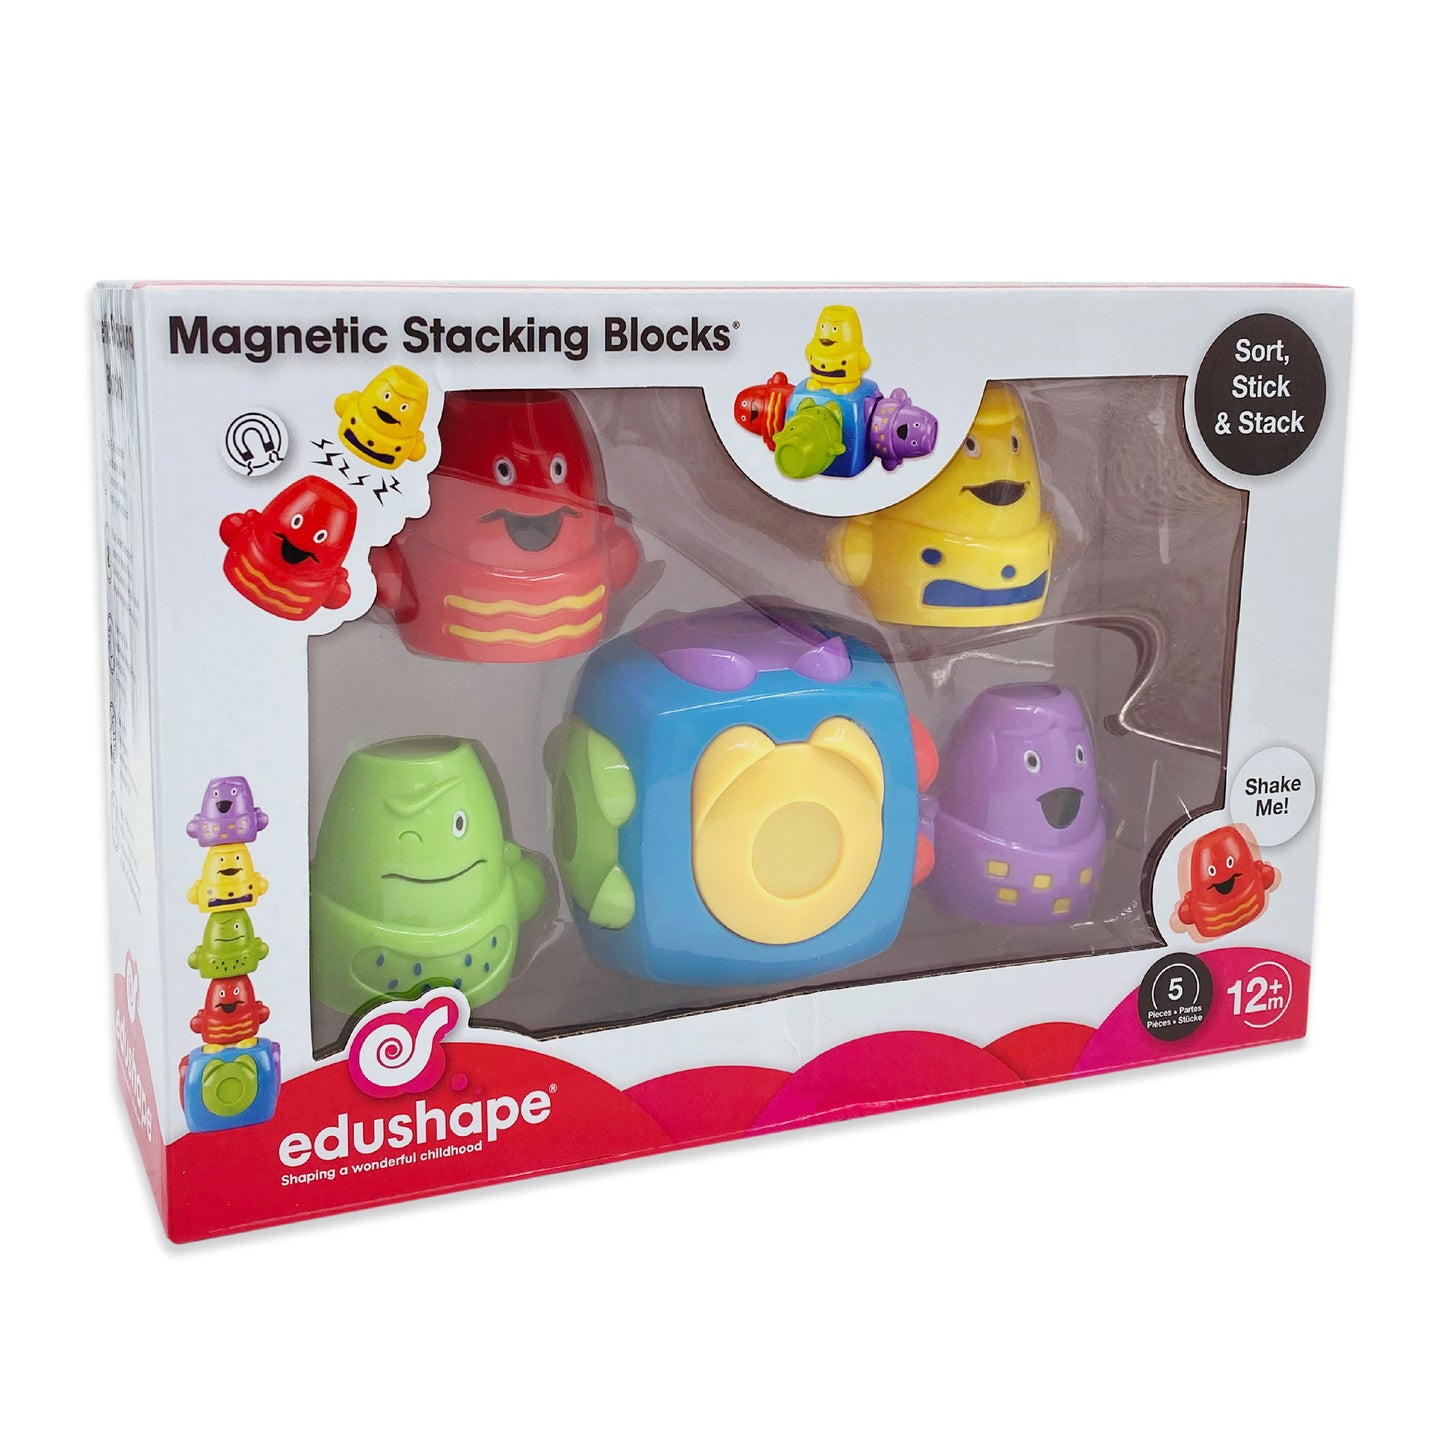 Sticking Stackers Magnetic Block